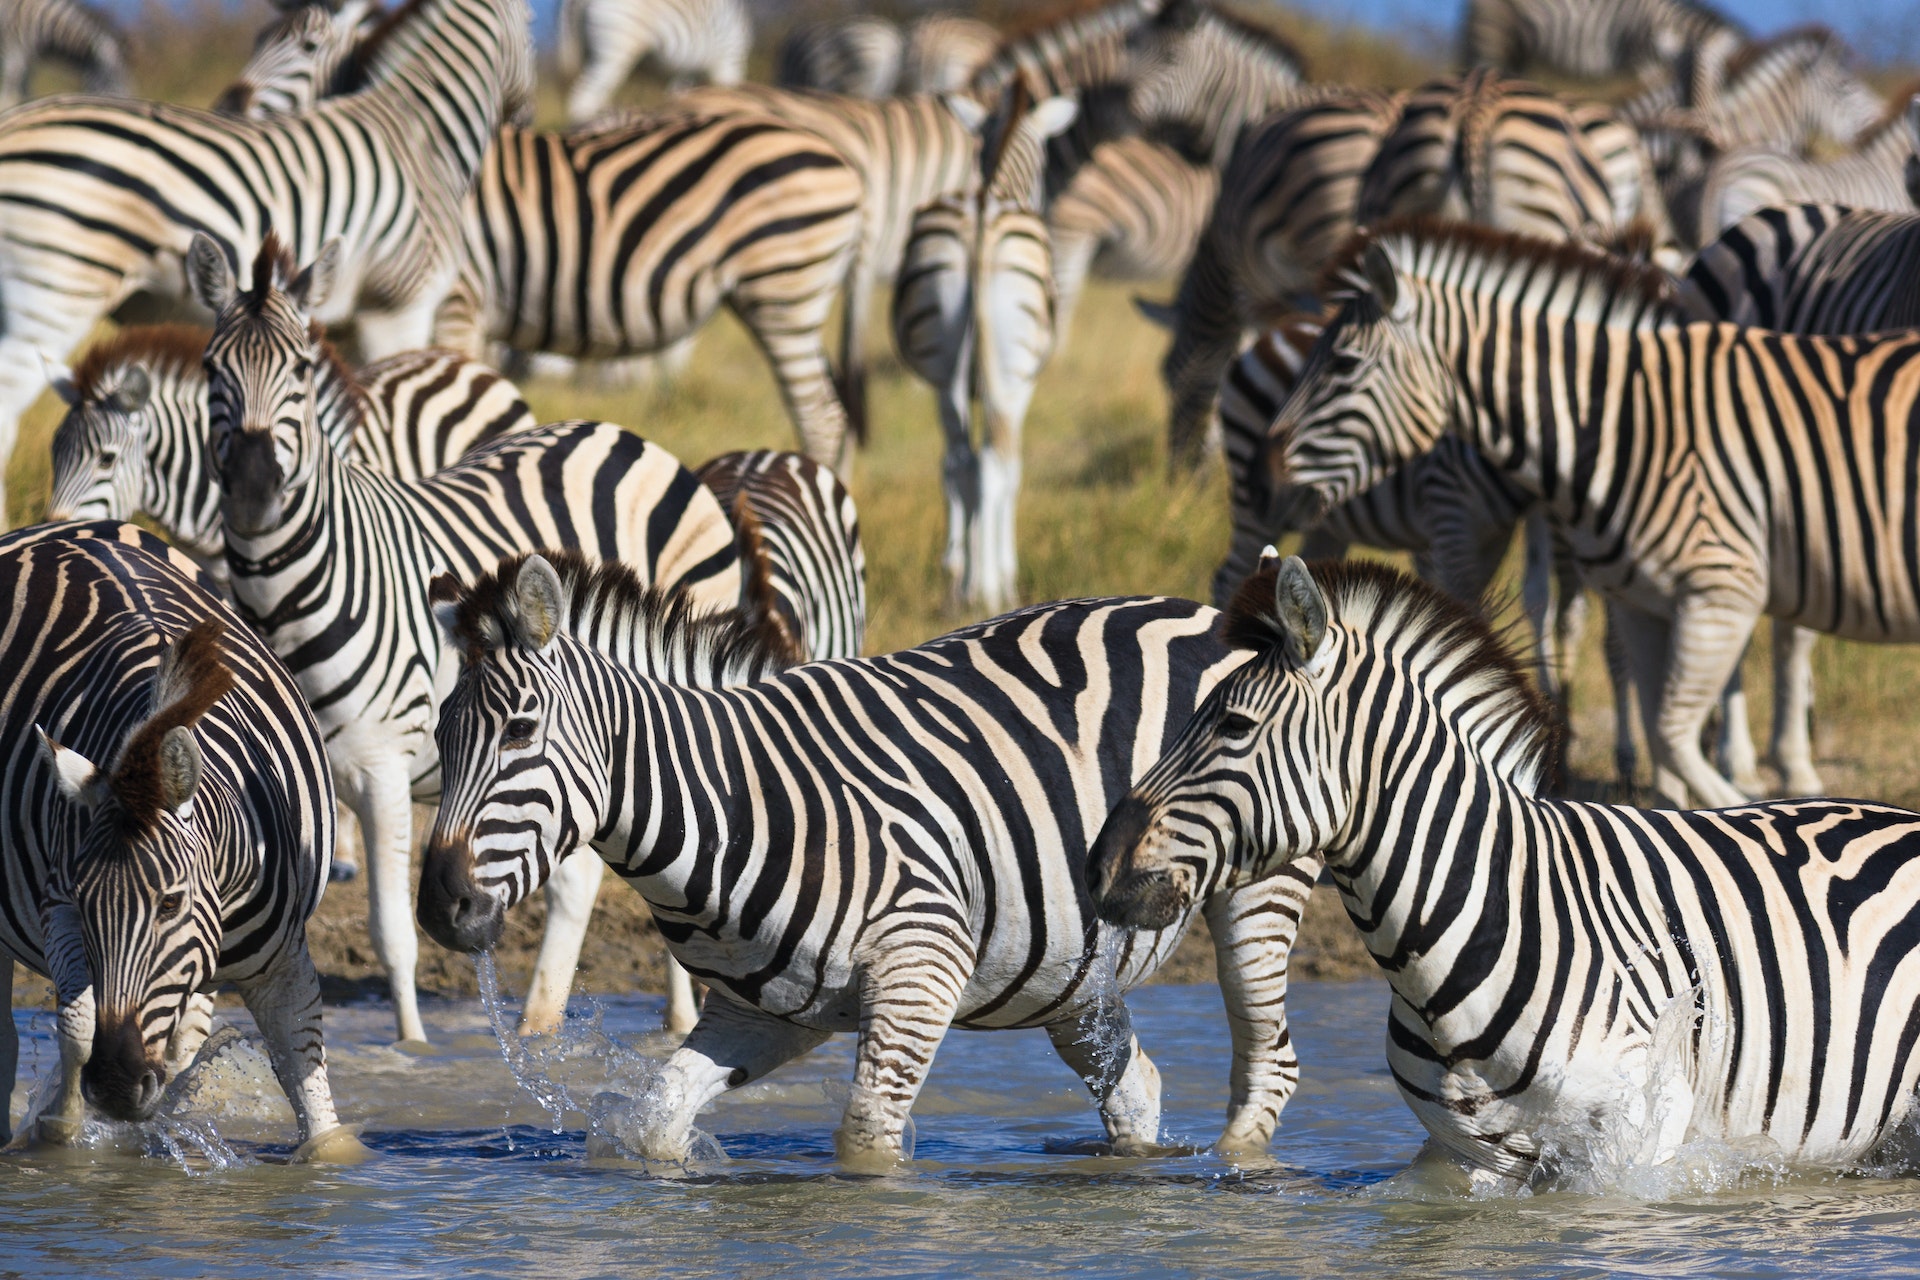 Black-and-white striped horse-like creatures gathered together in a group as they wade through water